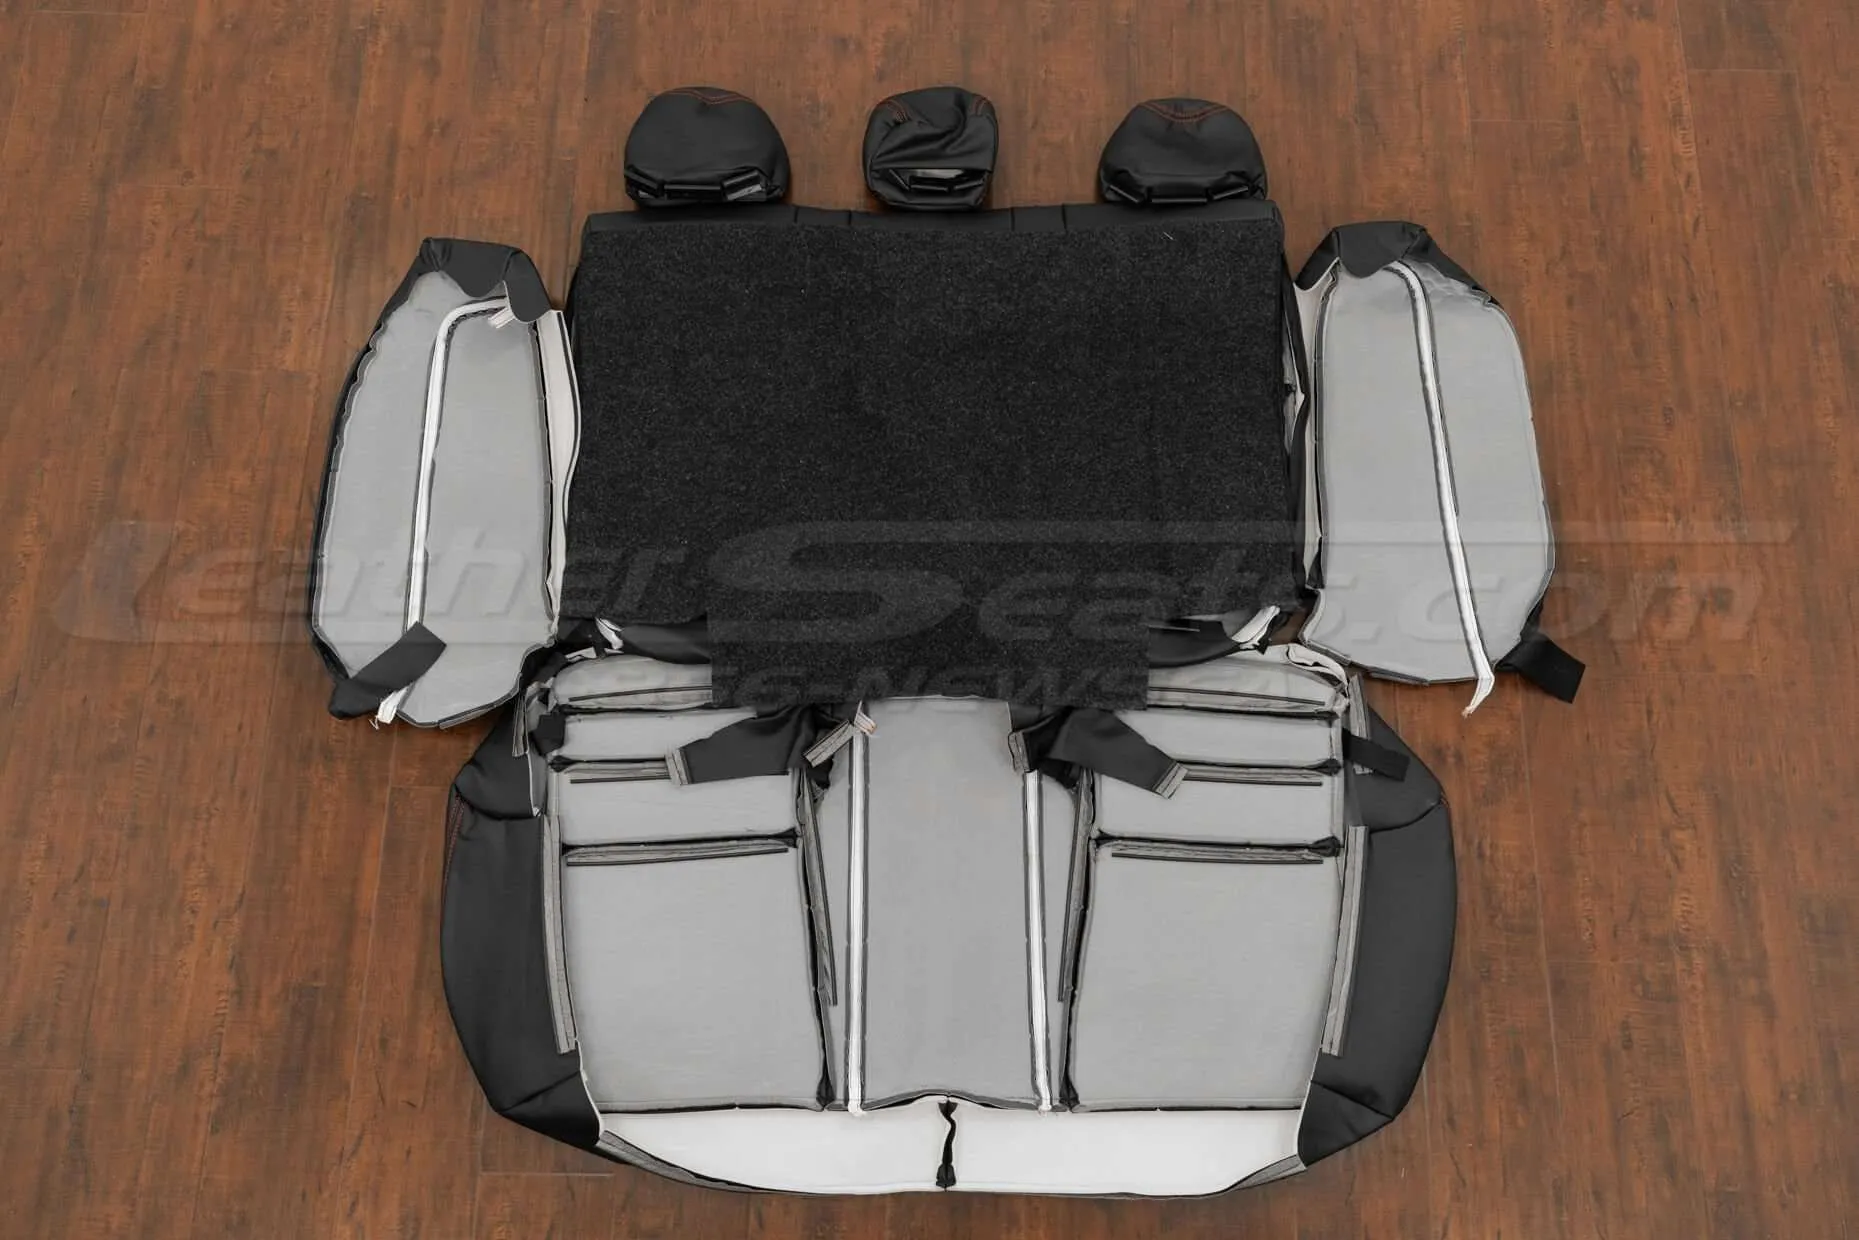 Back view of rear seats with bolsters